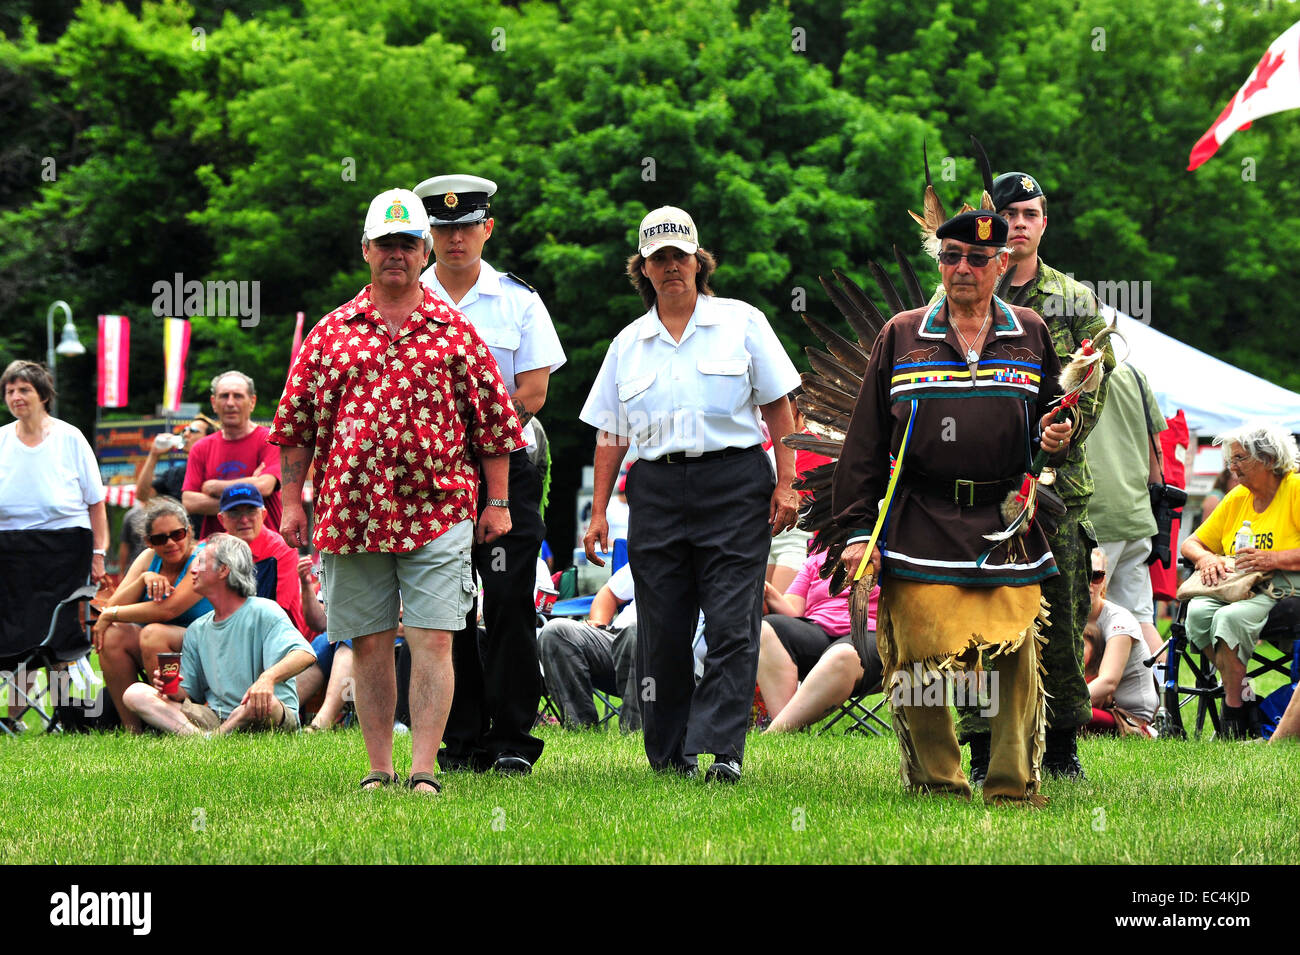 Indigenous Canadians participate in Canada Day celebrations held in a park in London, Ontario. Stock Photo